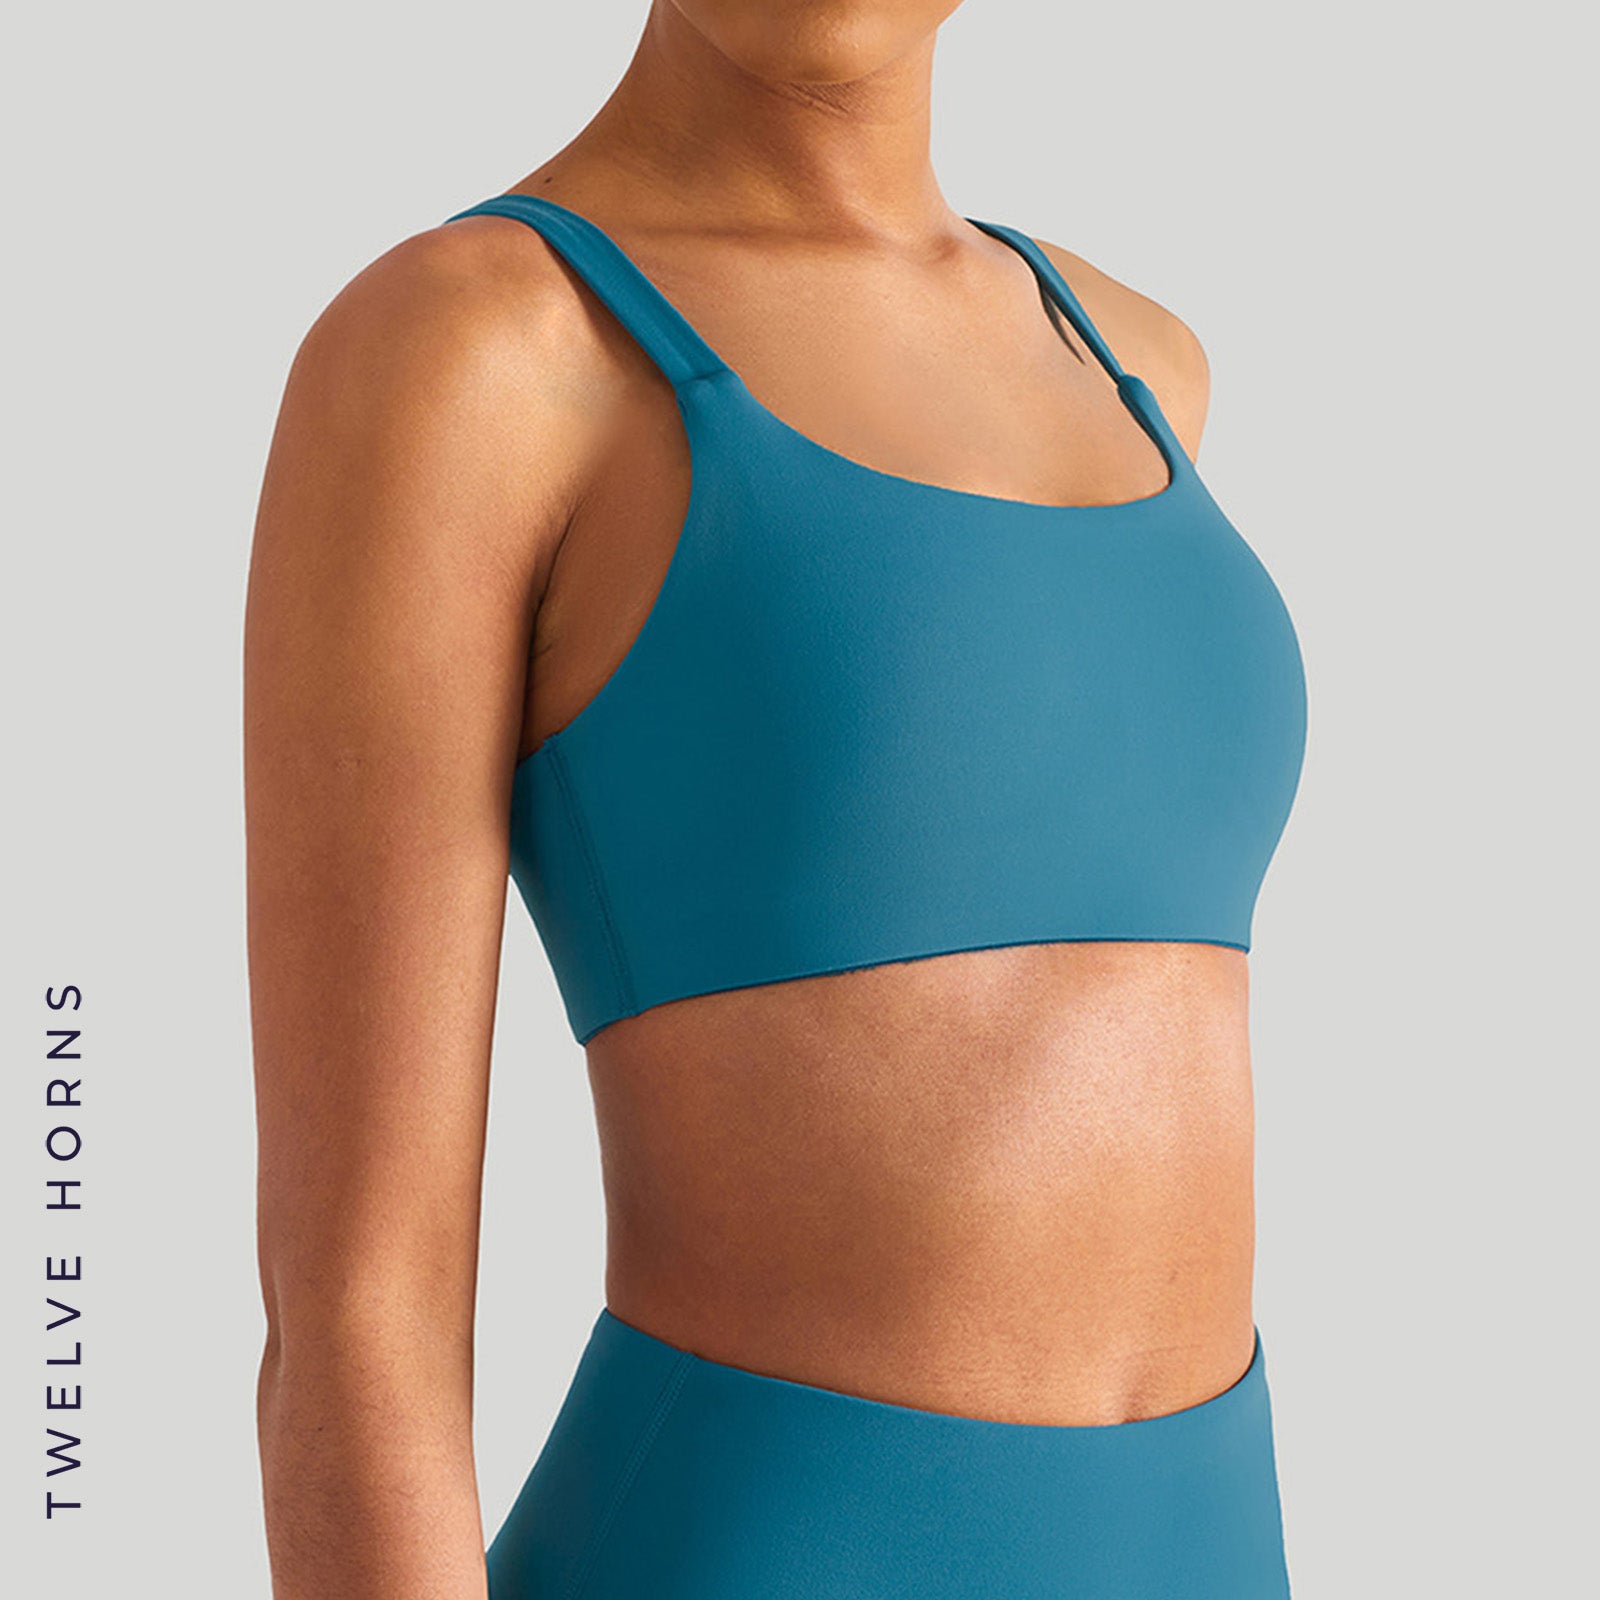 The Ultimate Sports Bra for Yoga, Pilates, and More